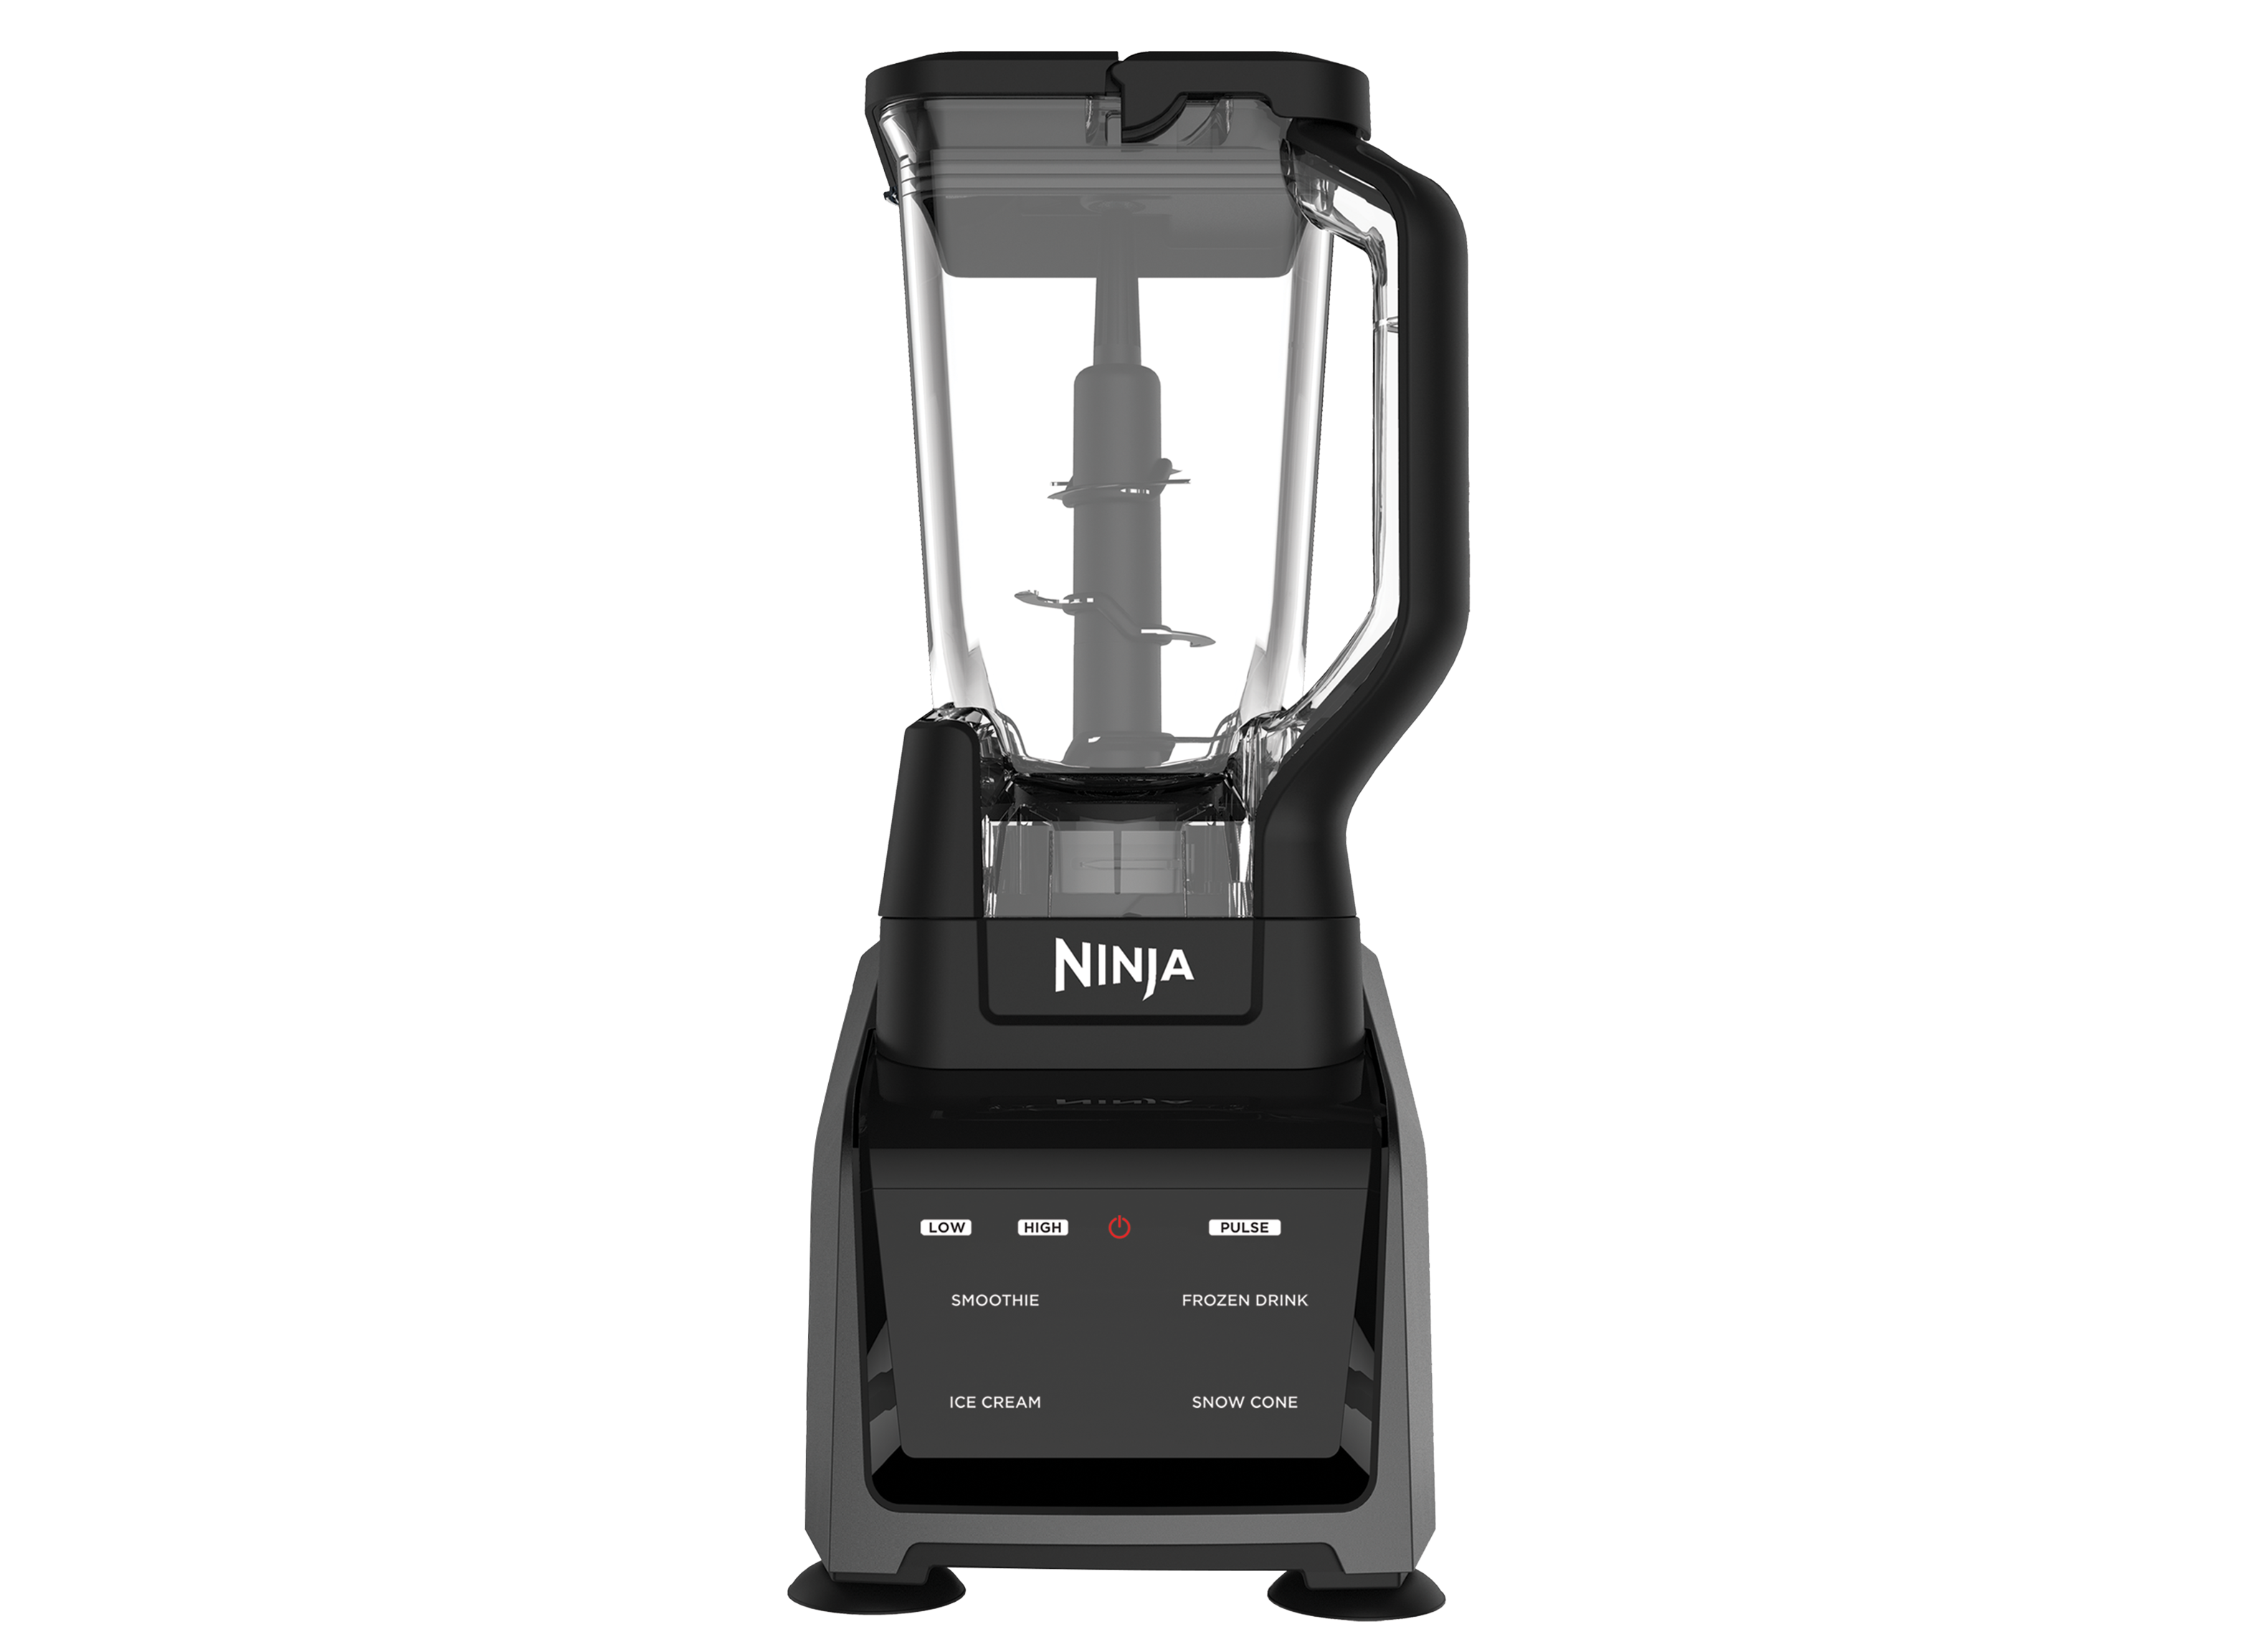 https://crdms.images.consumerreports.org/prod/products/cr/models/394536-personal-blender-ninja-intelli-sense-kitchen-system-ct682sp-personal-10000568.png